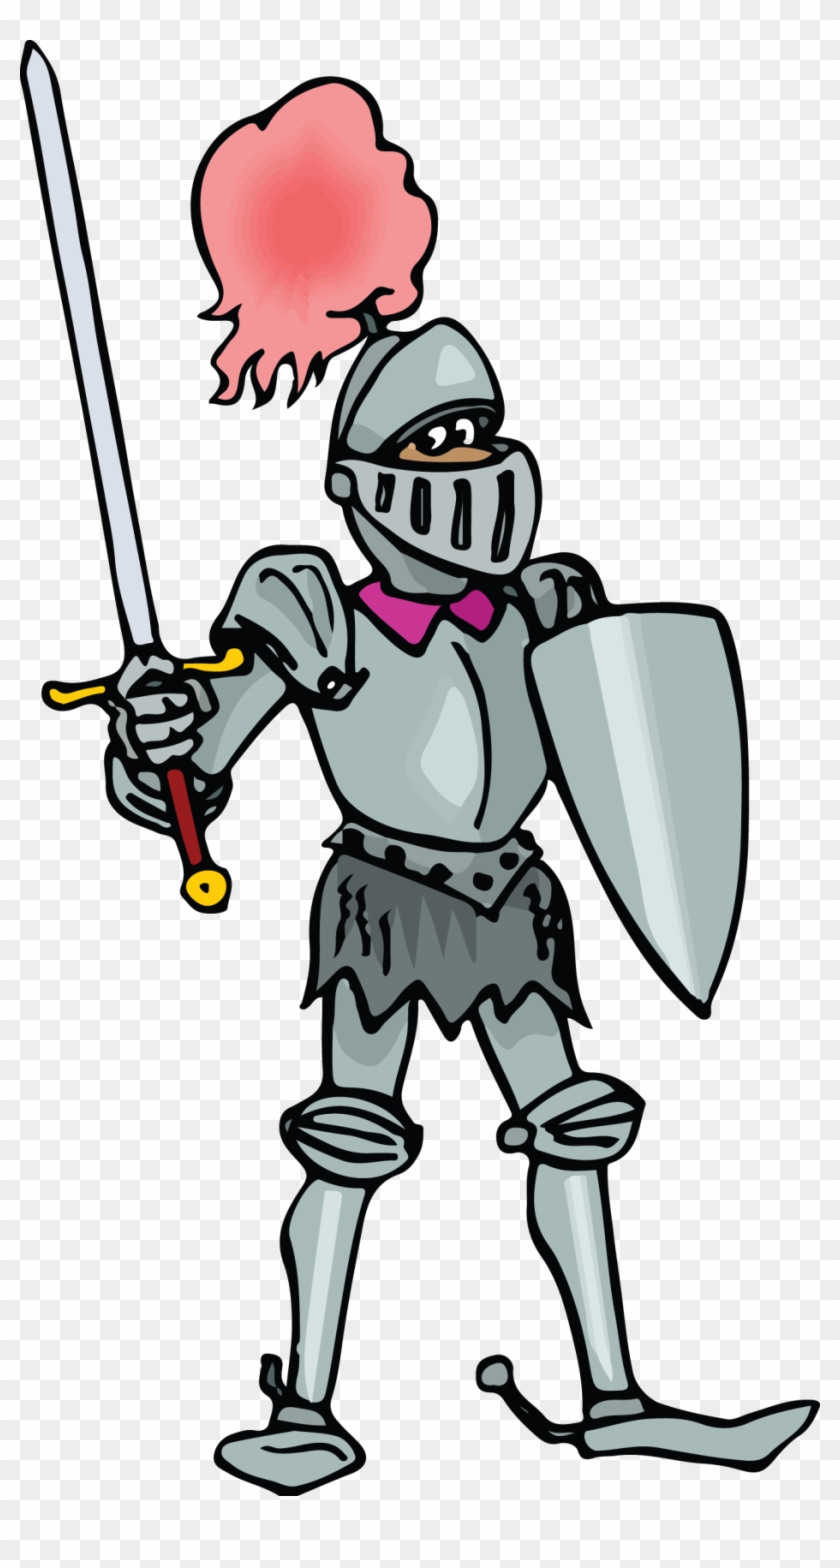 Knight Middle Ages Clip Art - Knight Middle Ages Clip Art #250204